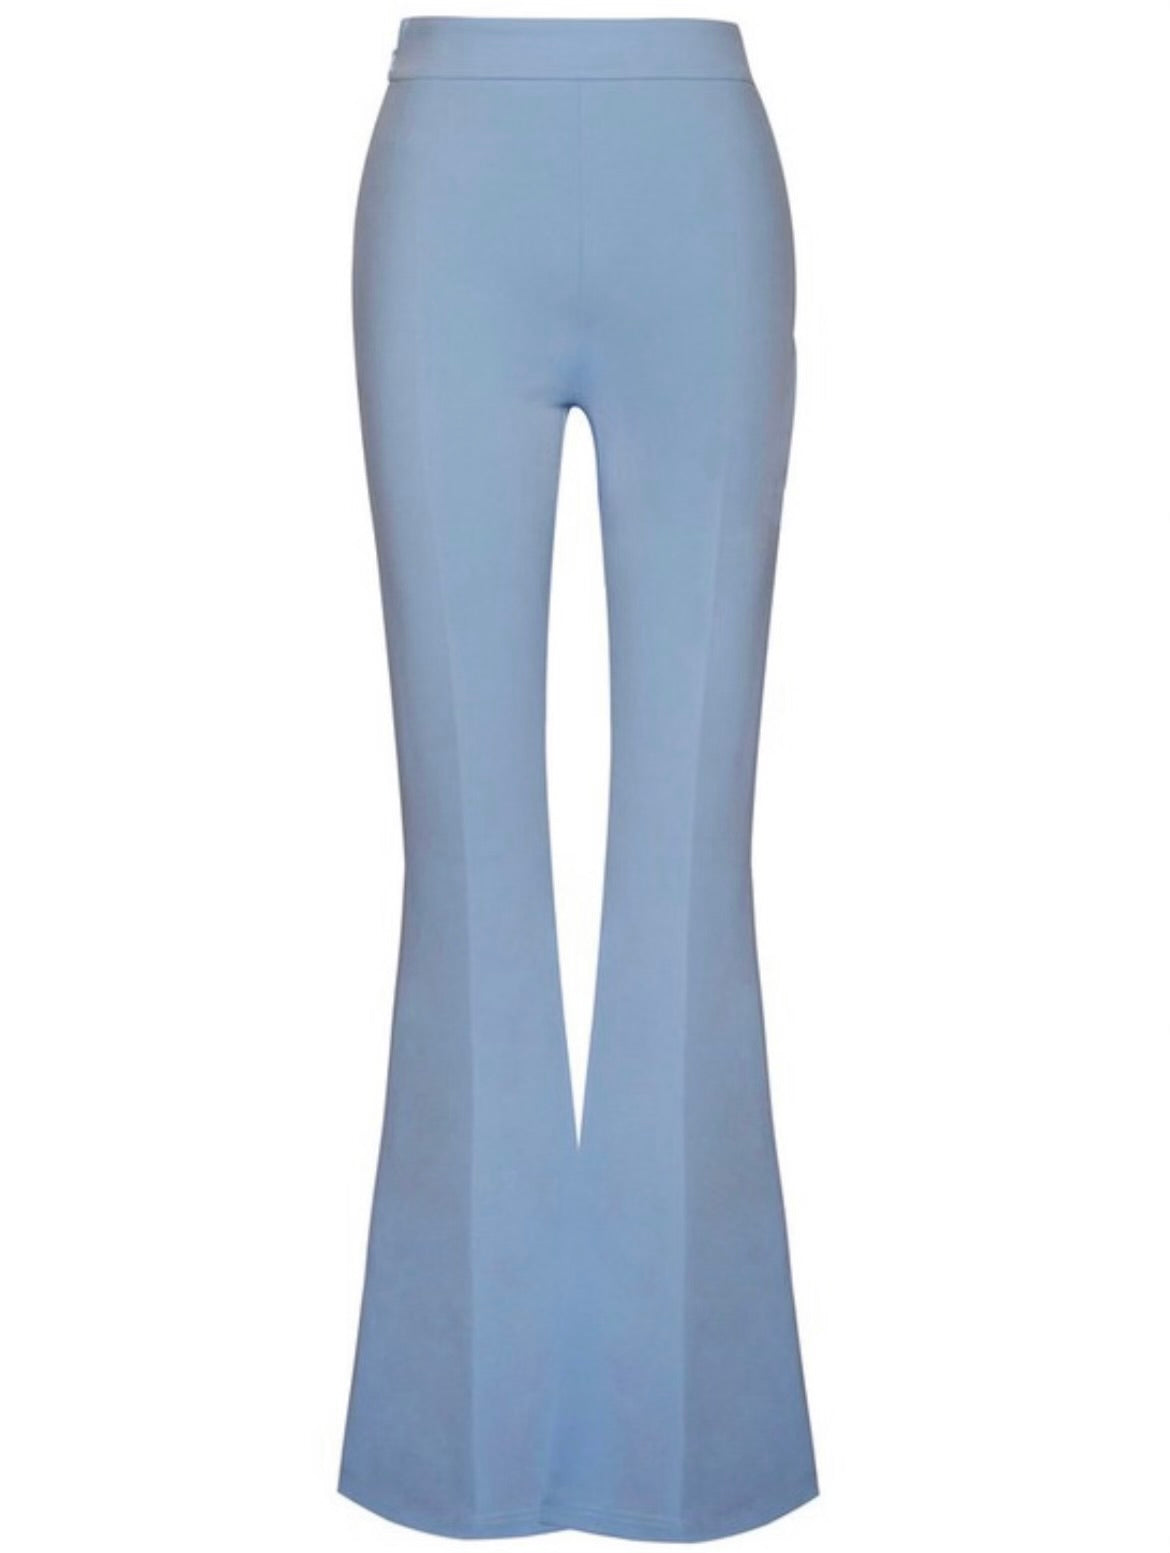 Baby Blue Trousers